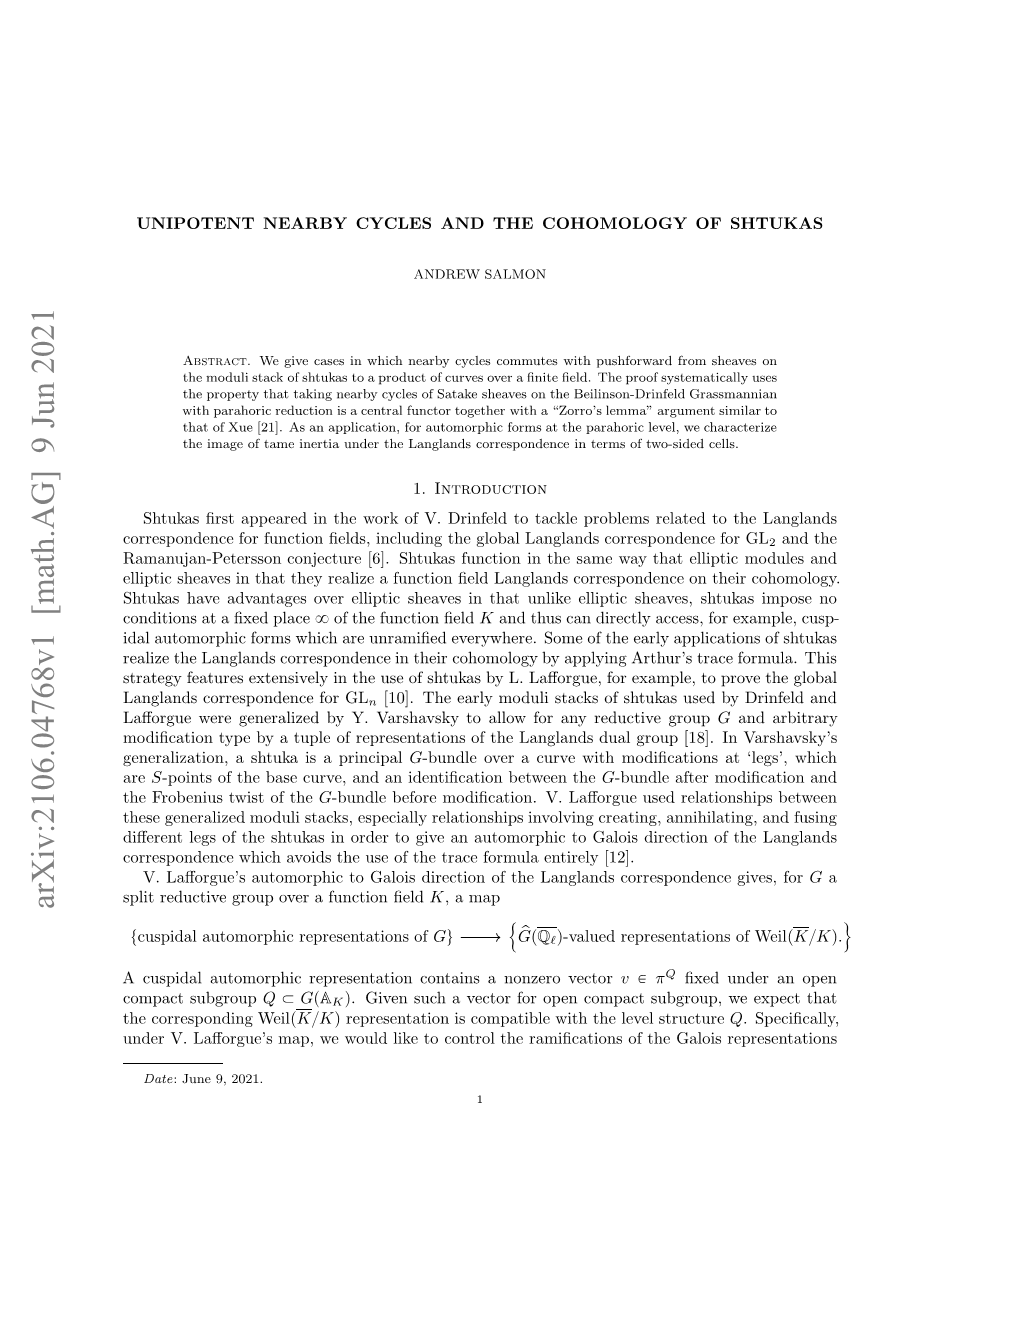 Unipotent Nearby Cycles and the Cohomology of Shtukas 3